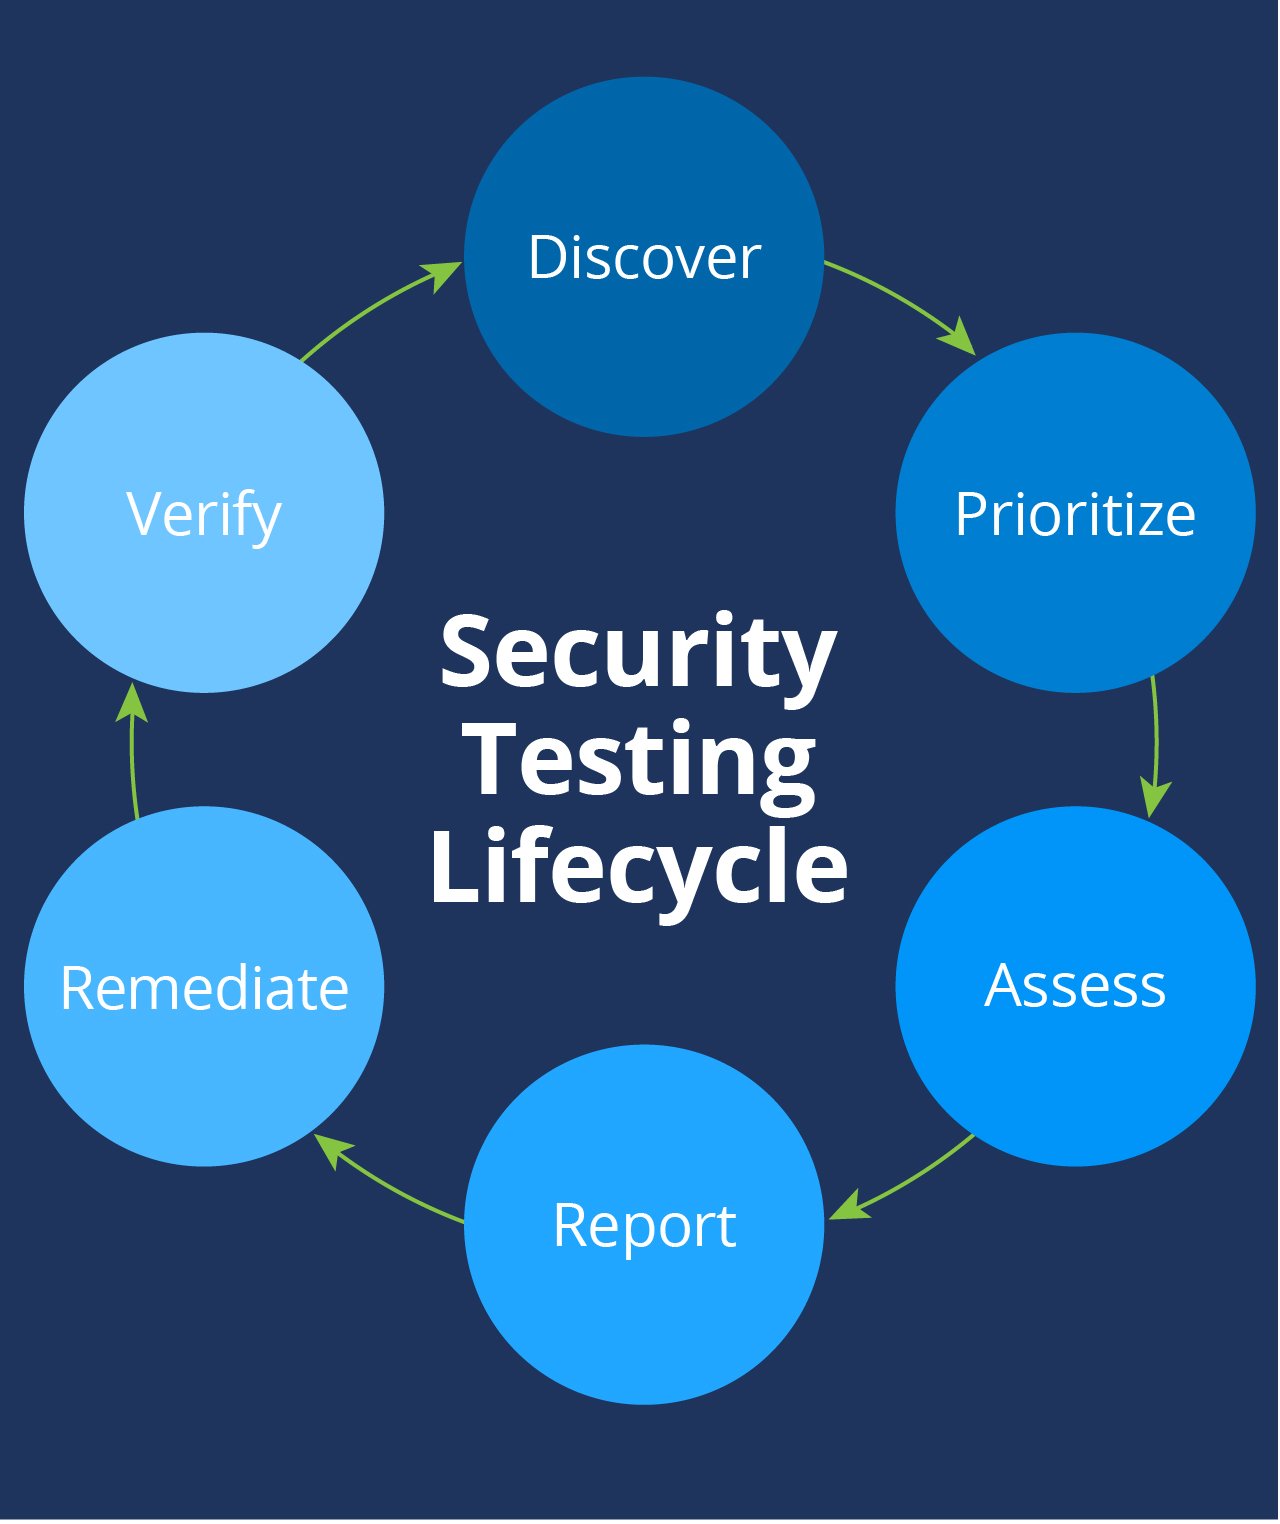 Security Testing Lifecycle_MobileDiagram-1